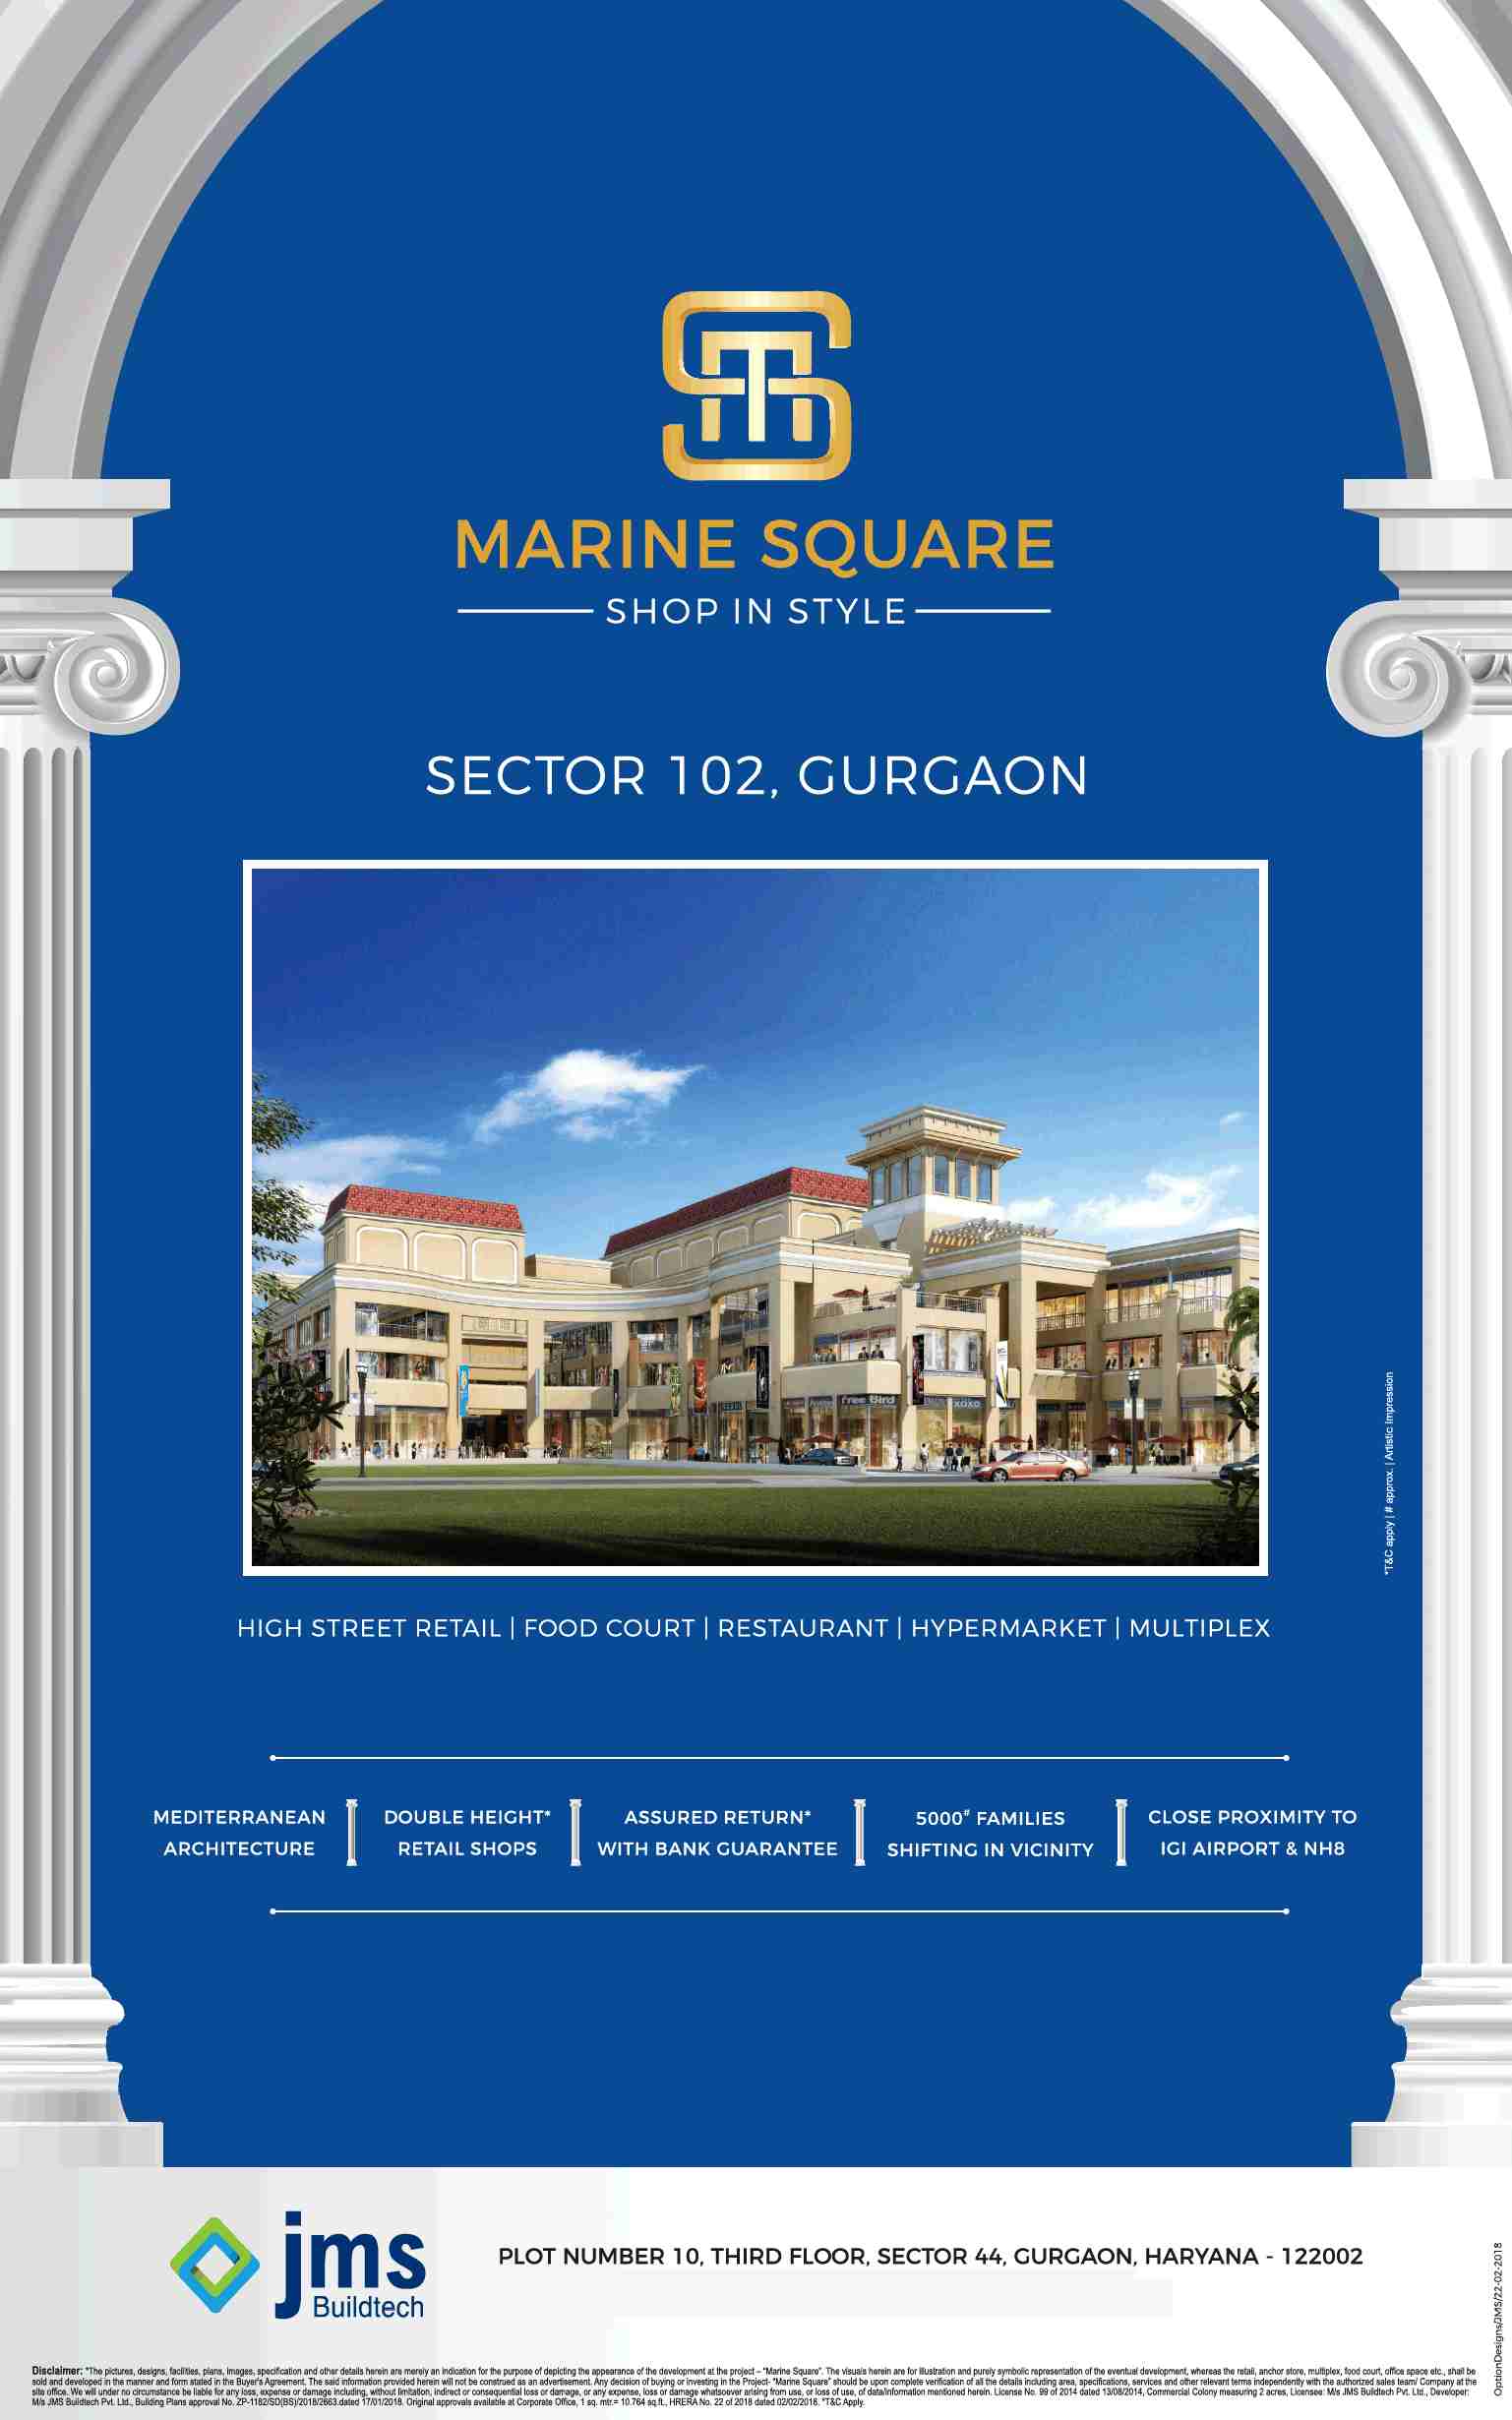 Discover luxurious shopping experience like never before at JMS Marine Square in Gurgaon Update